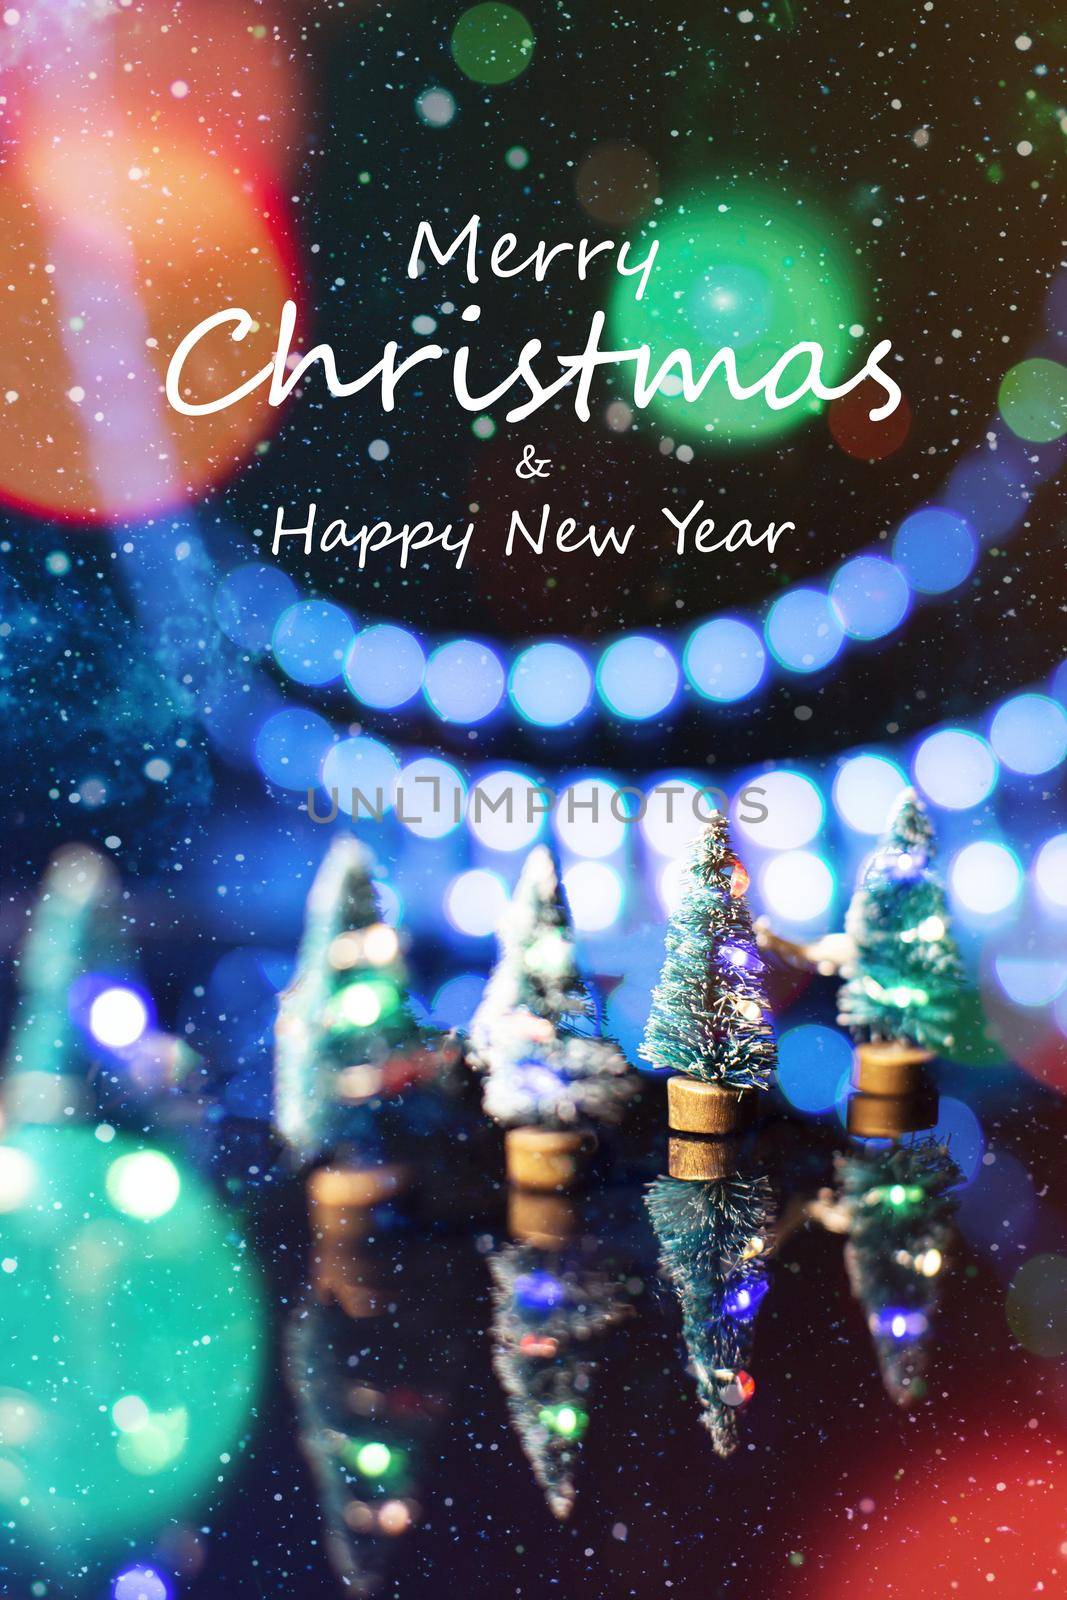 Merry Christmas & Happy New Year Text Design Over Magical Blue Defocused Bokeh Lights . Christmas Card with Glittering Festive Holiday Background by Maximusnd